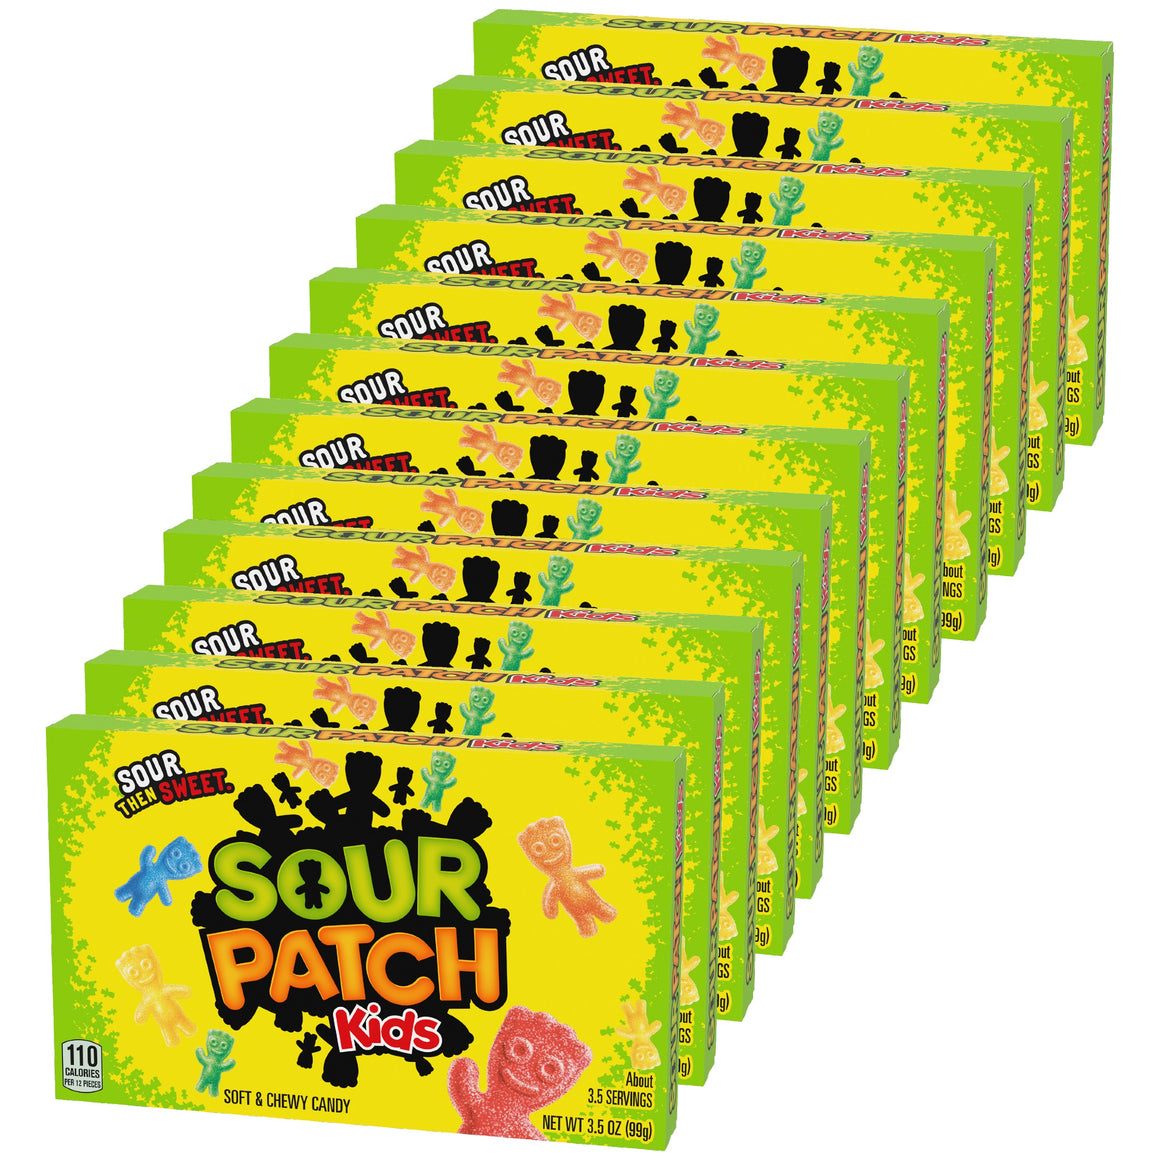 All City Candy Sour Patch Kids Soft & Chewy Candy - 3.5 oz. Theater Box Theater Boxes Mondelez International 1 Box For fresh candy and great service, visit www.allcitycandy.com